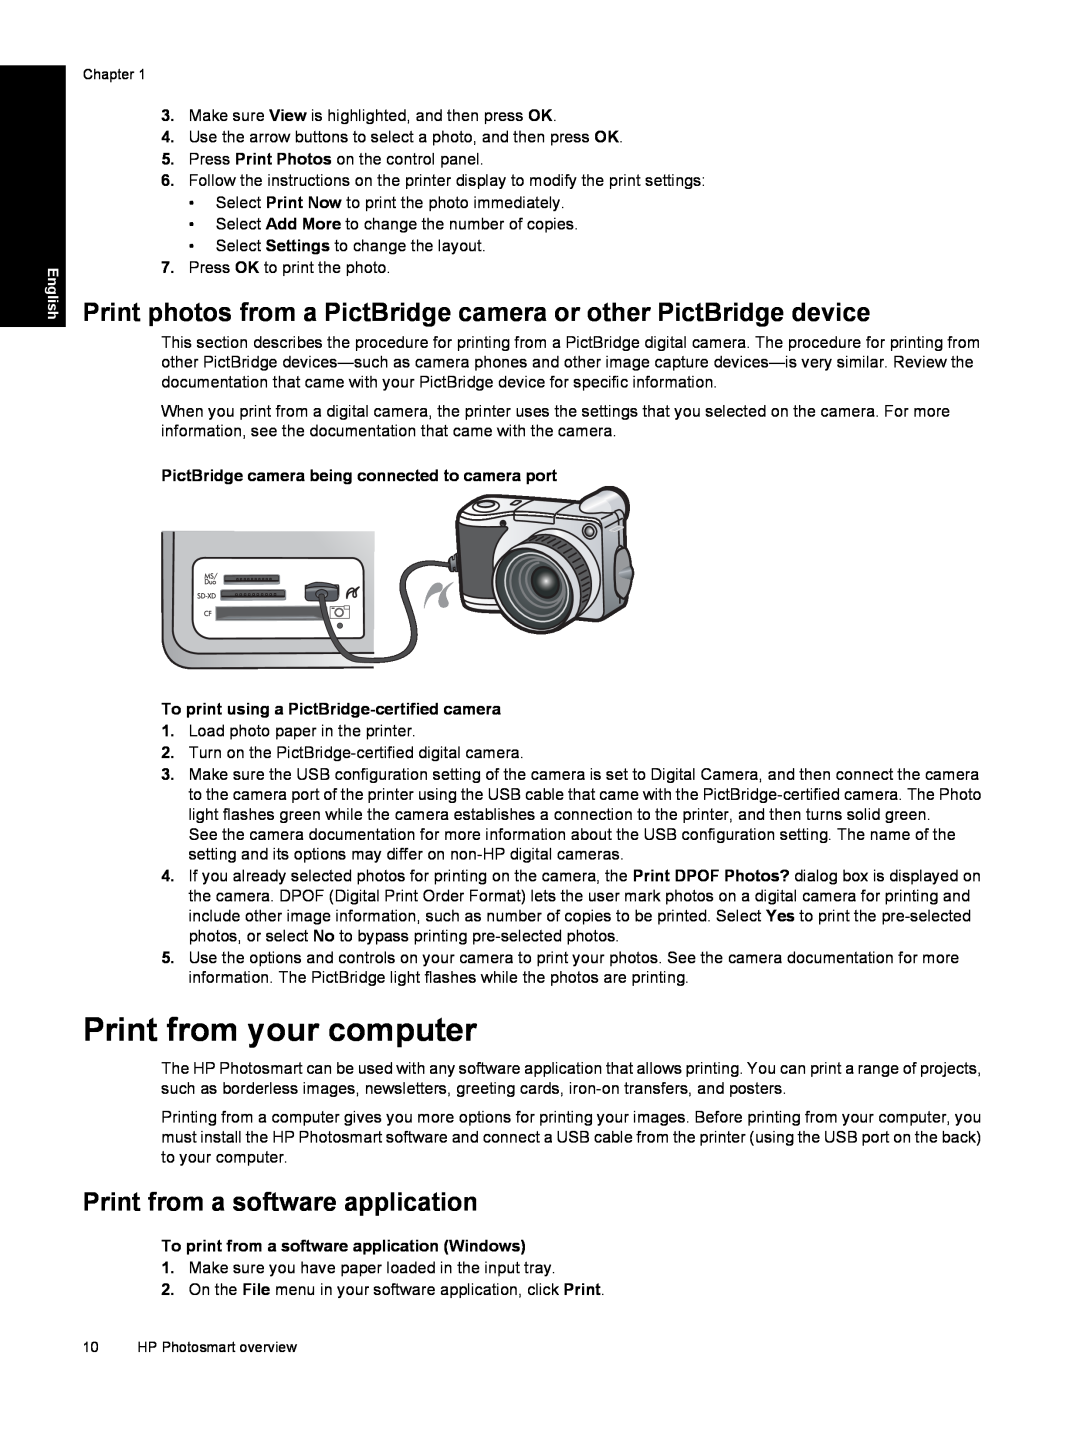 HP B8550 manual Print from your computer, Print photos from a PictBridge camera or other PictBridge device 